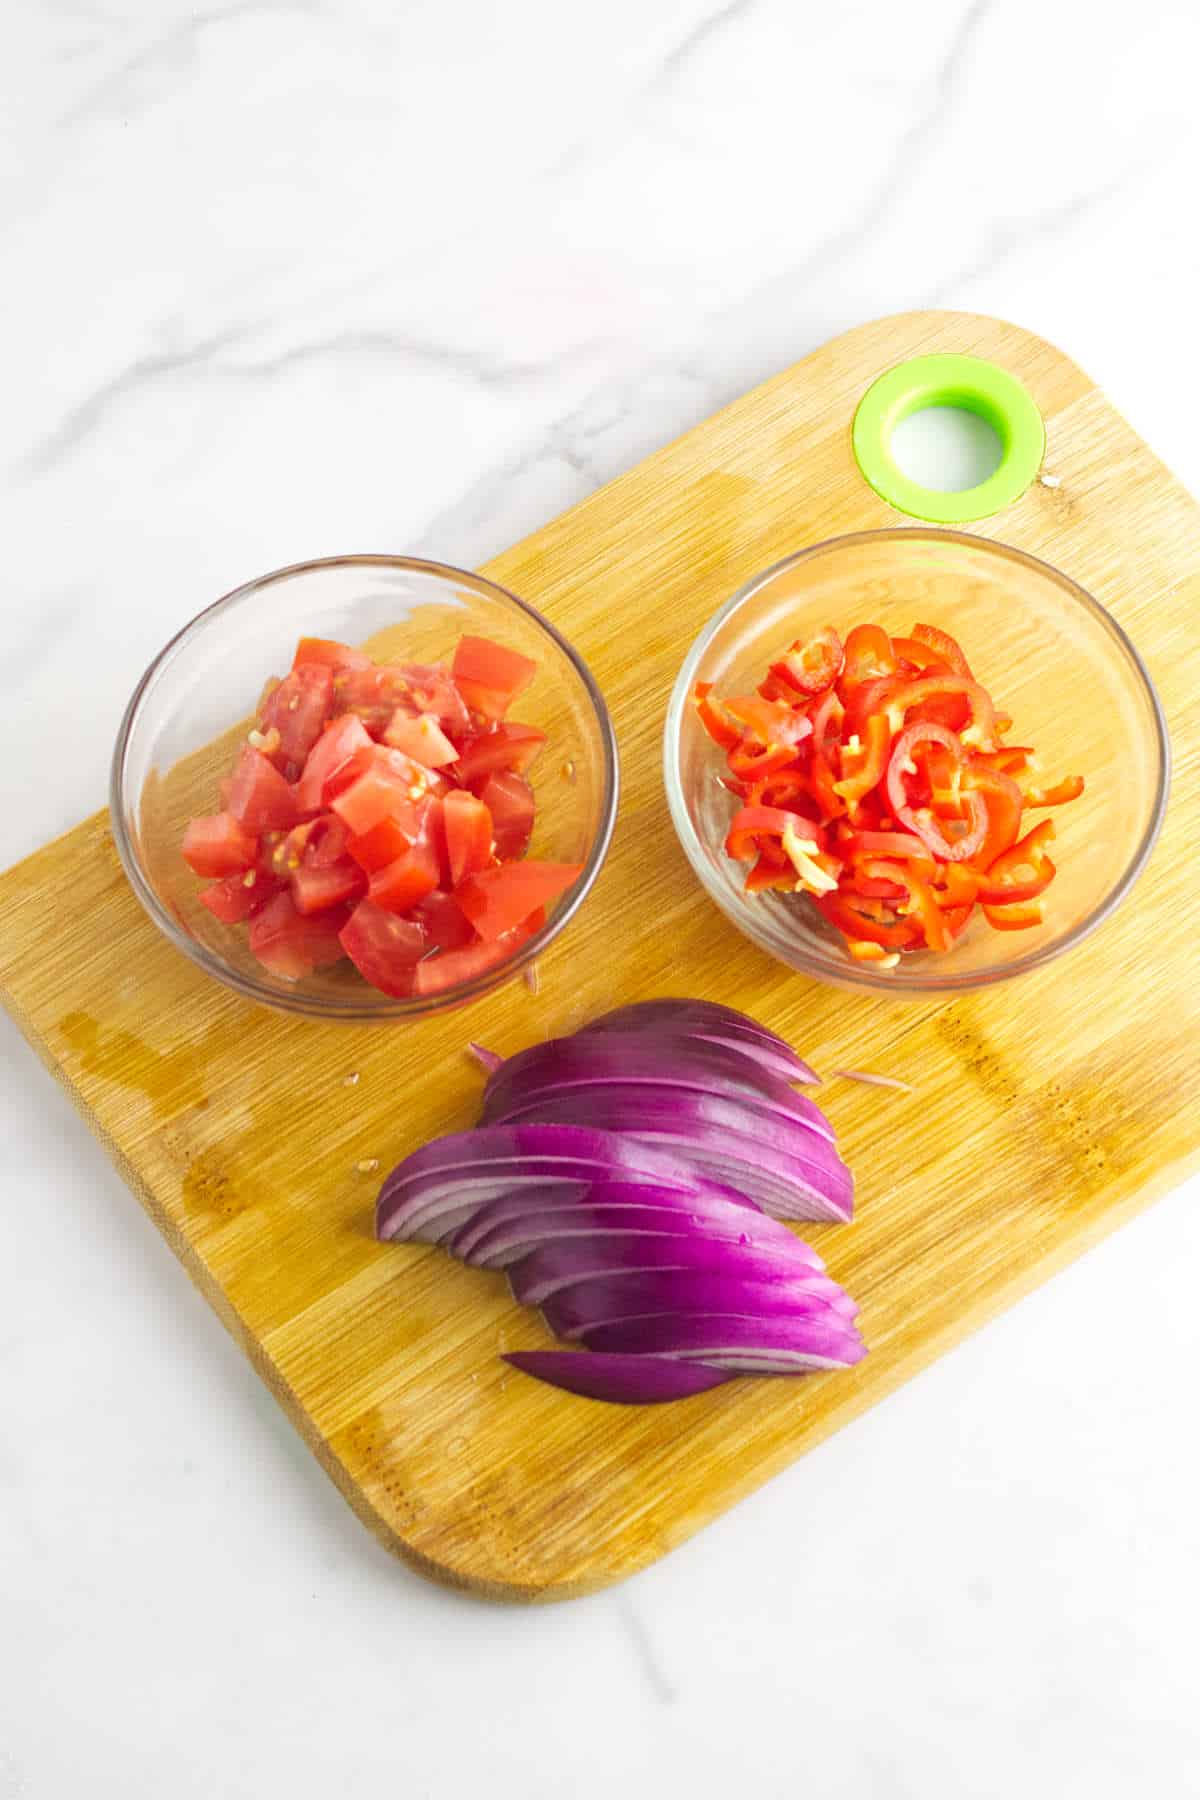 finely diced tomato, red onion, and sliced red chile peppers.